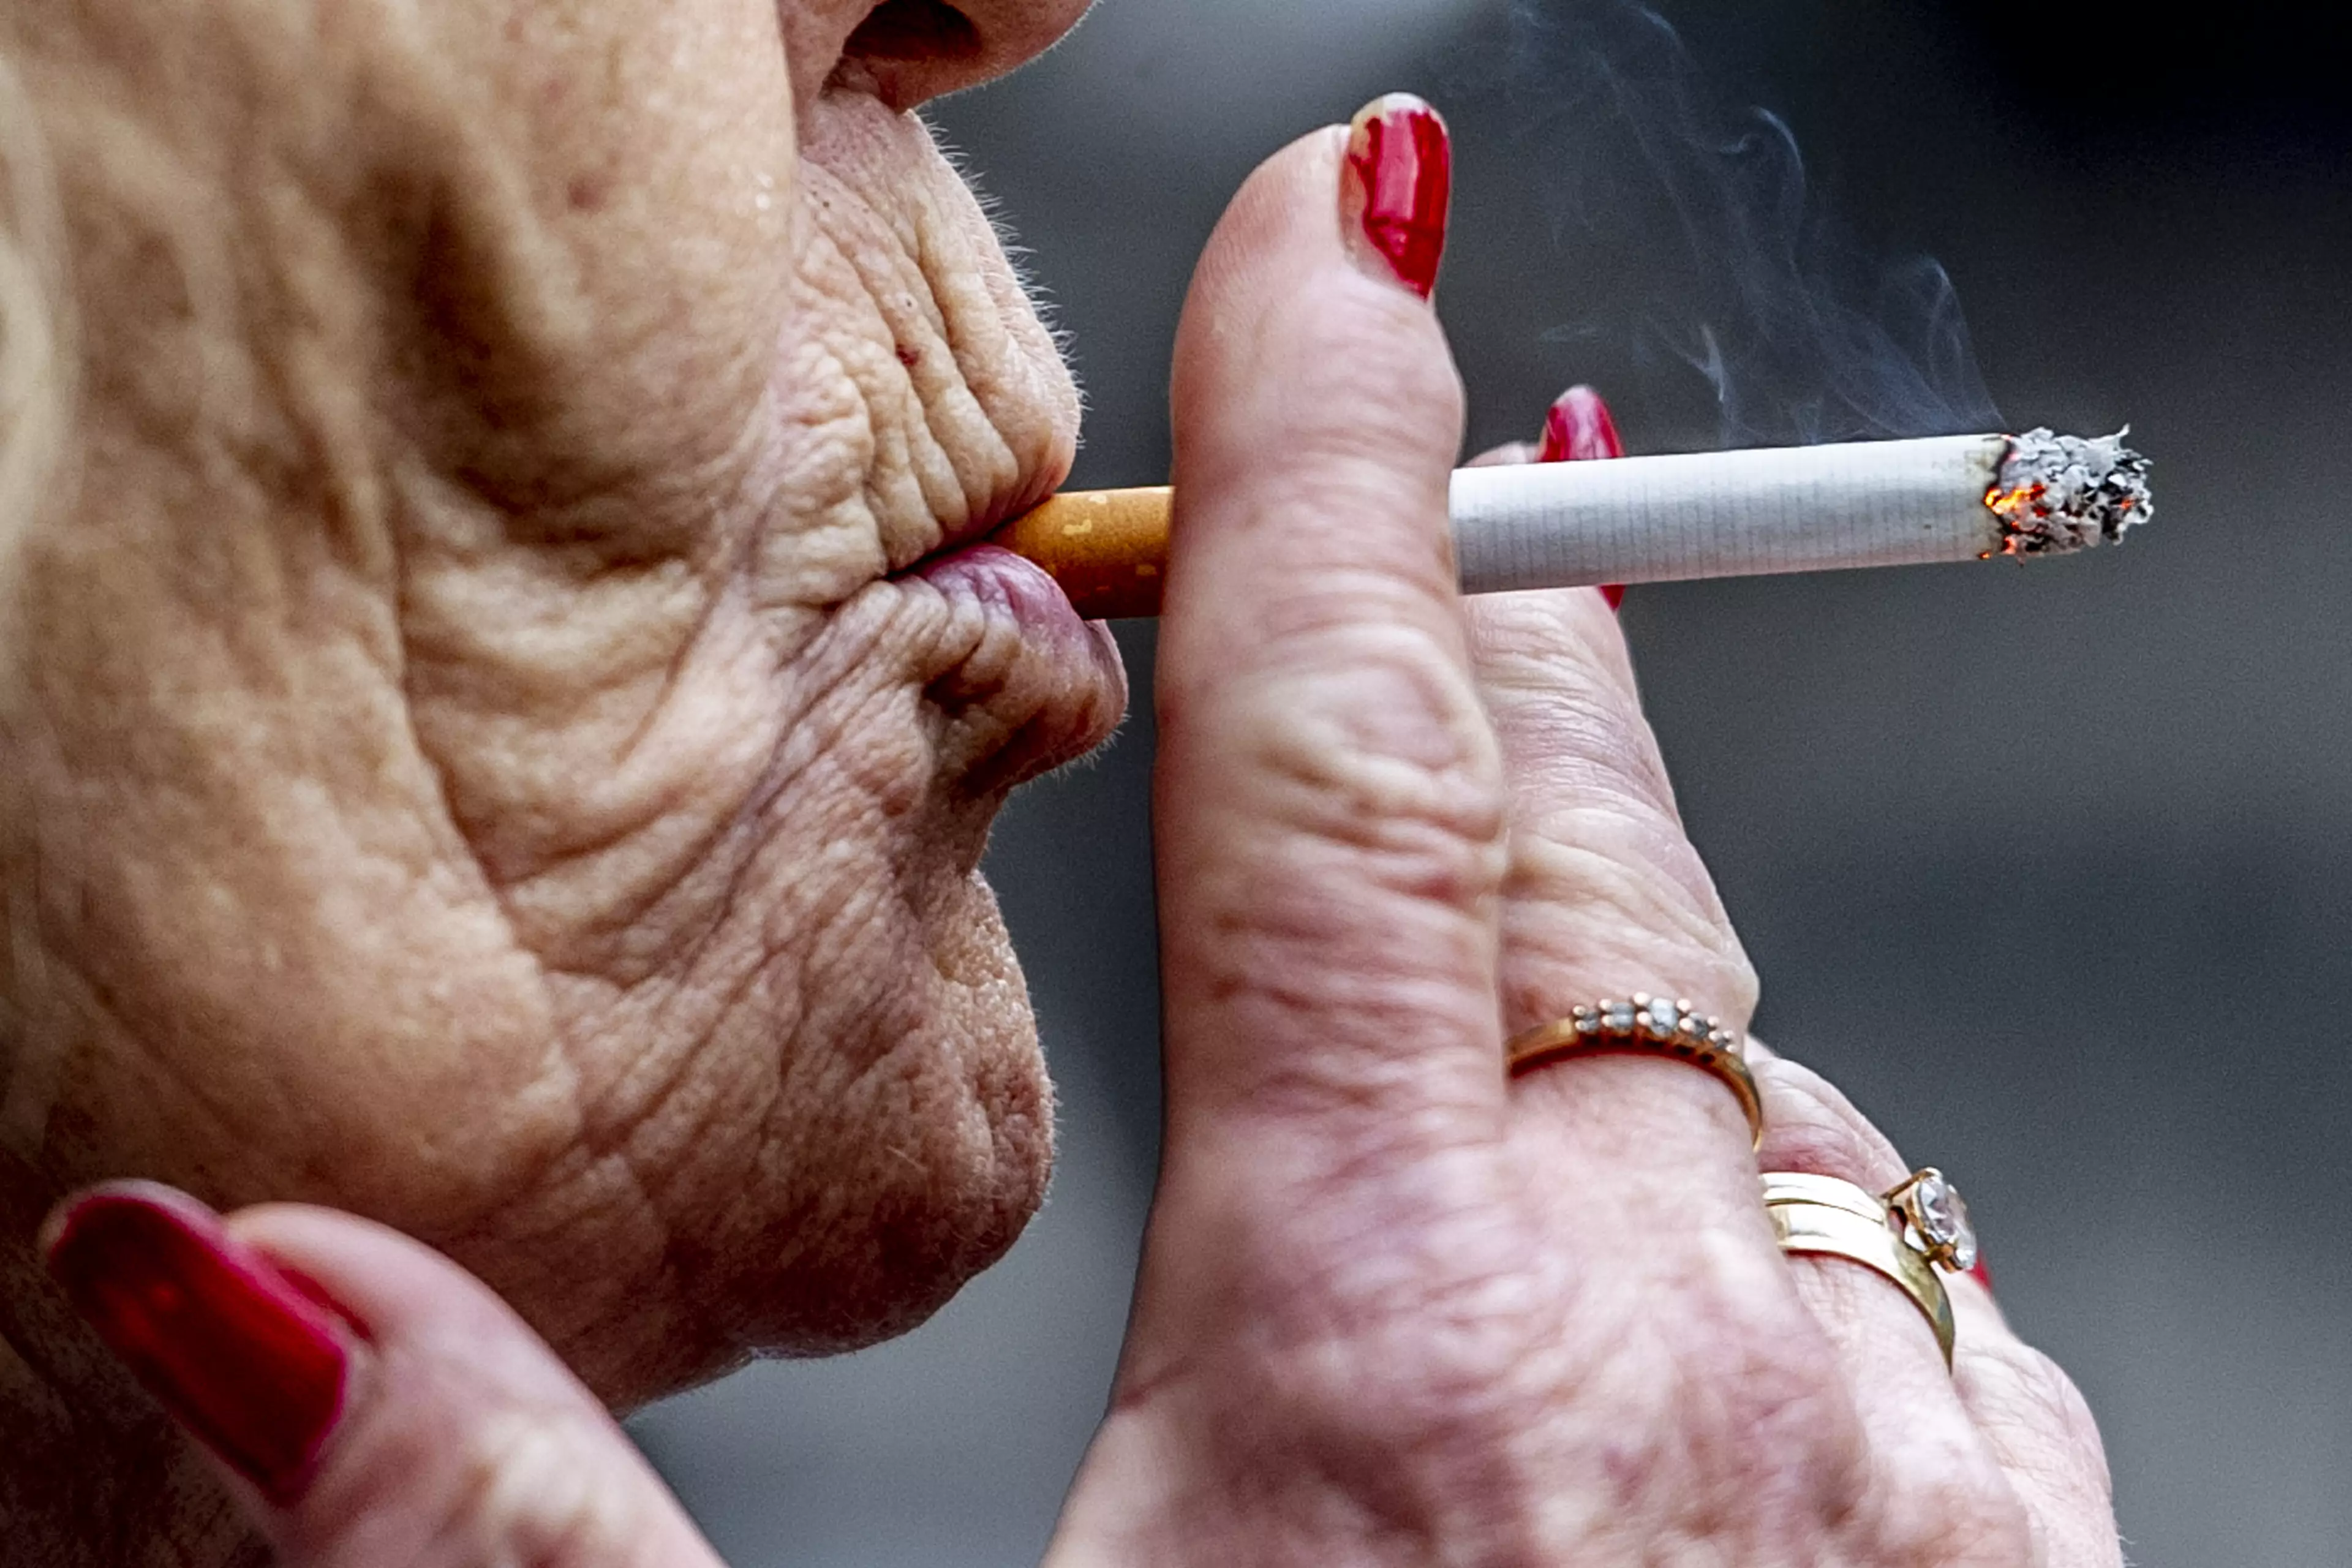 Smoking could be banned in council houses.